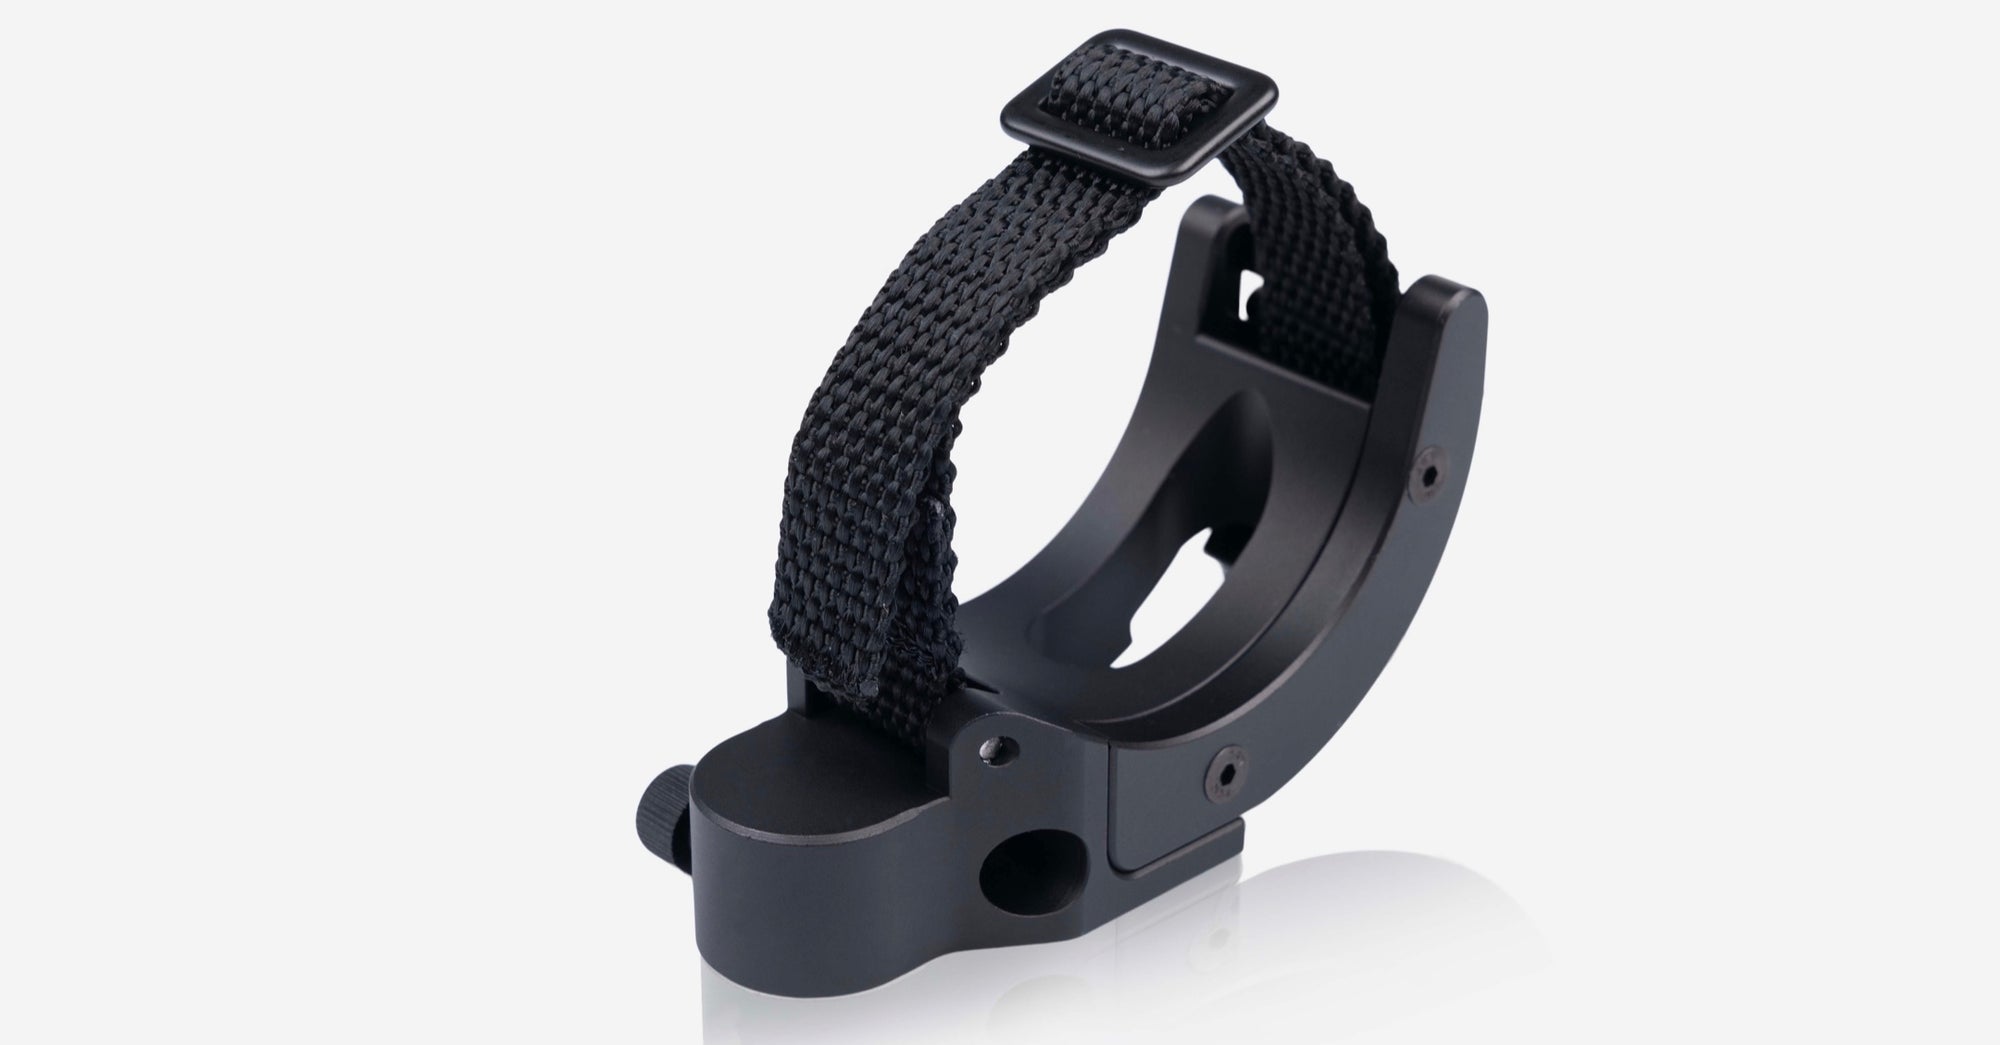 Product Launch - Our Binocular Holder